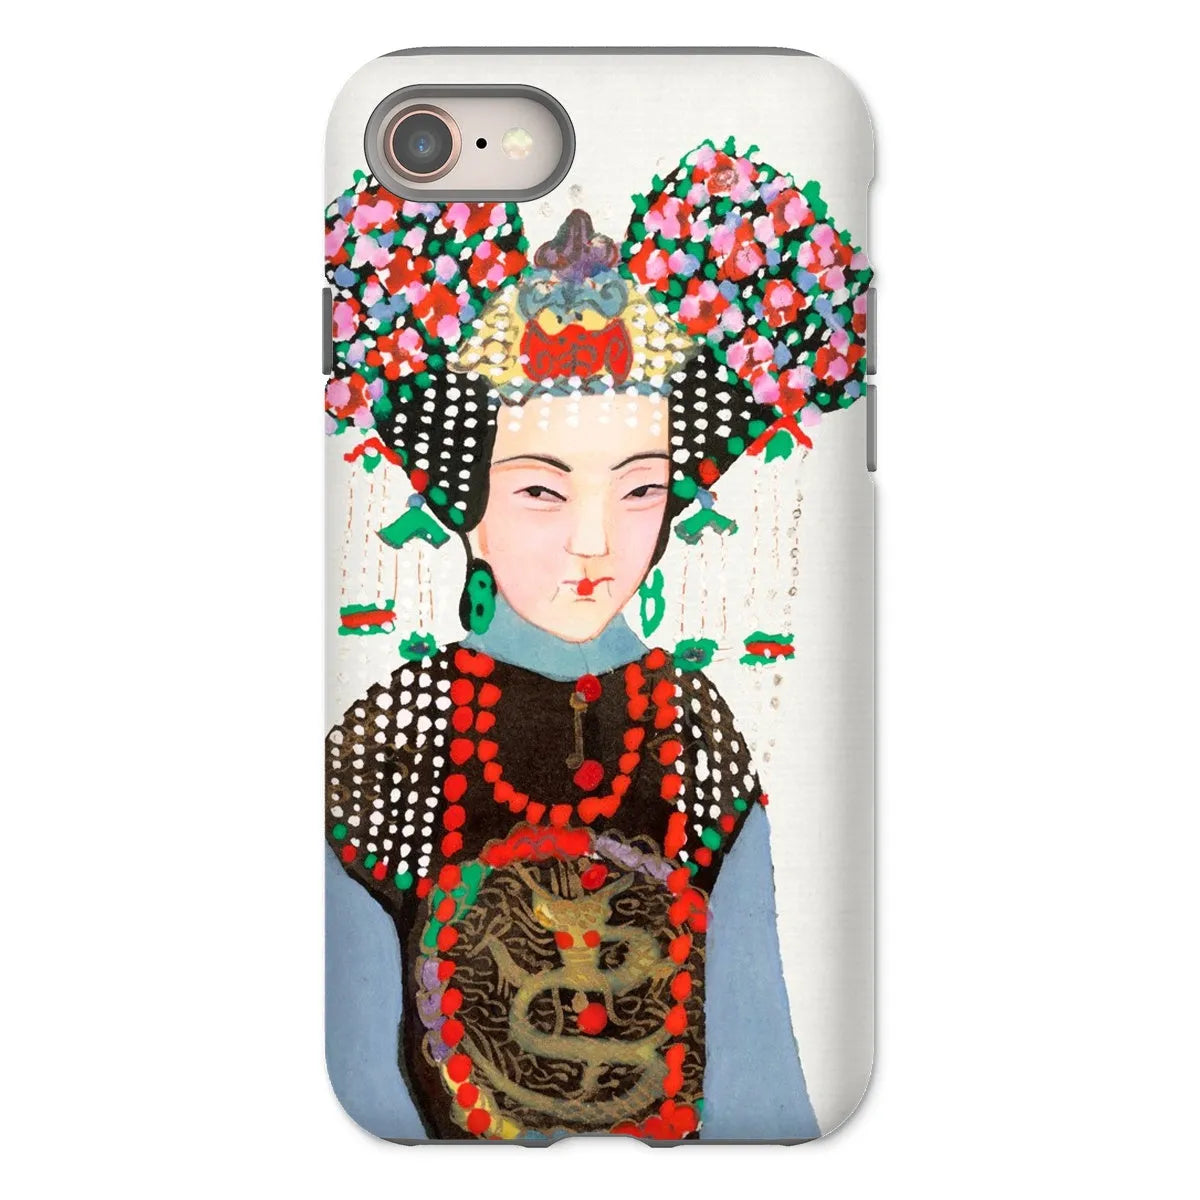 Chinese Empress - Manchu Art Phone Case - Iphone 8 / Matte - Mobile Phone Cases - Aesthetic Art